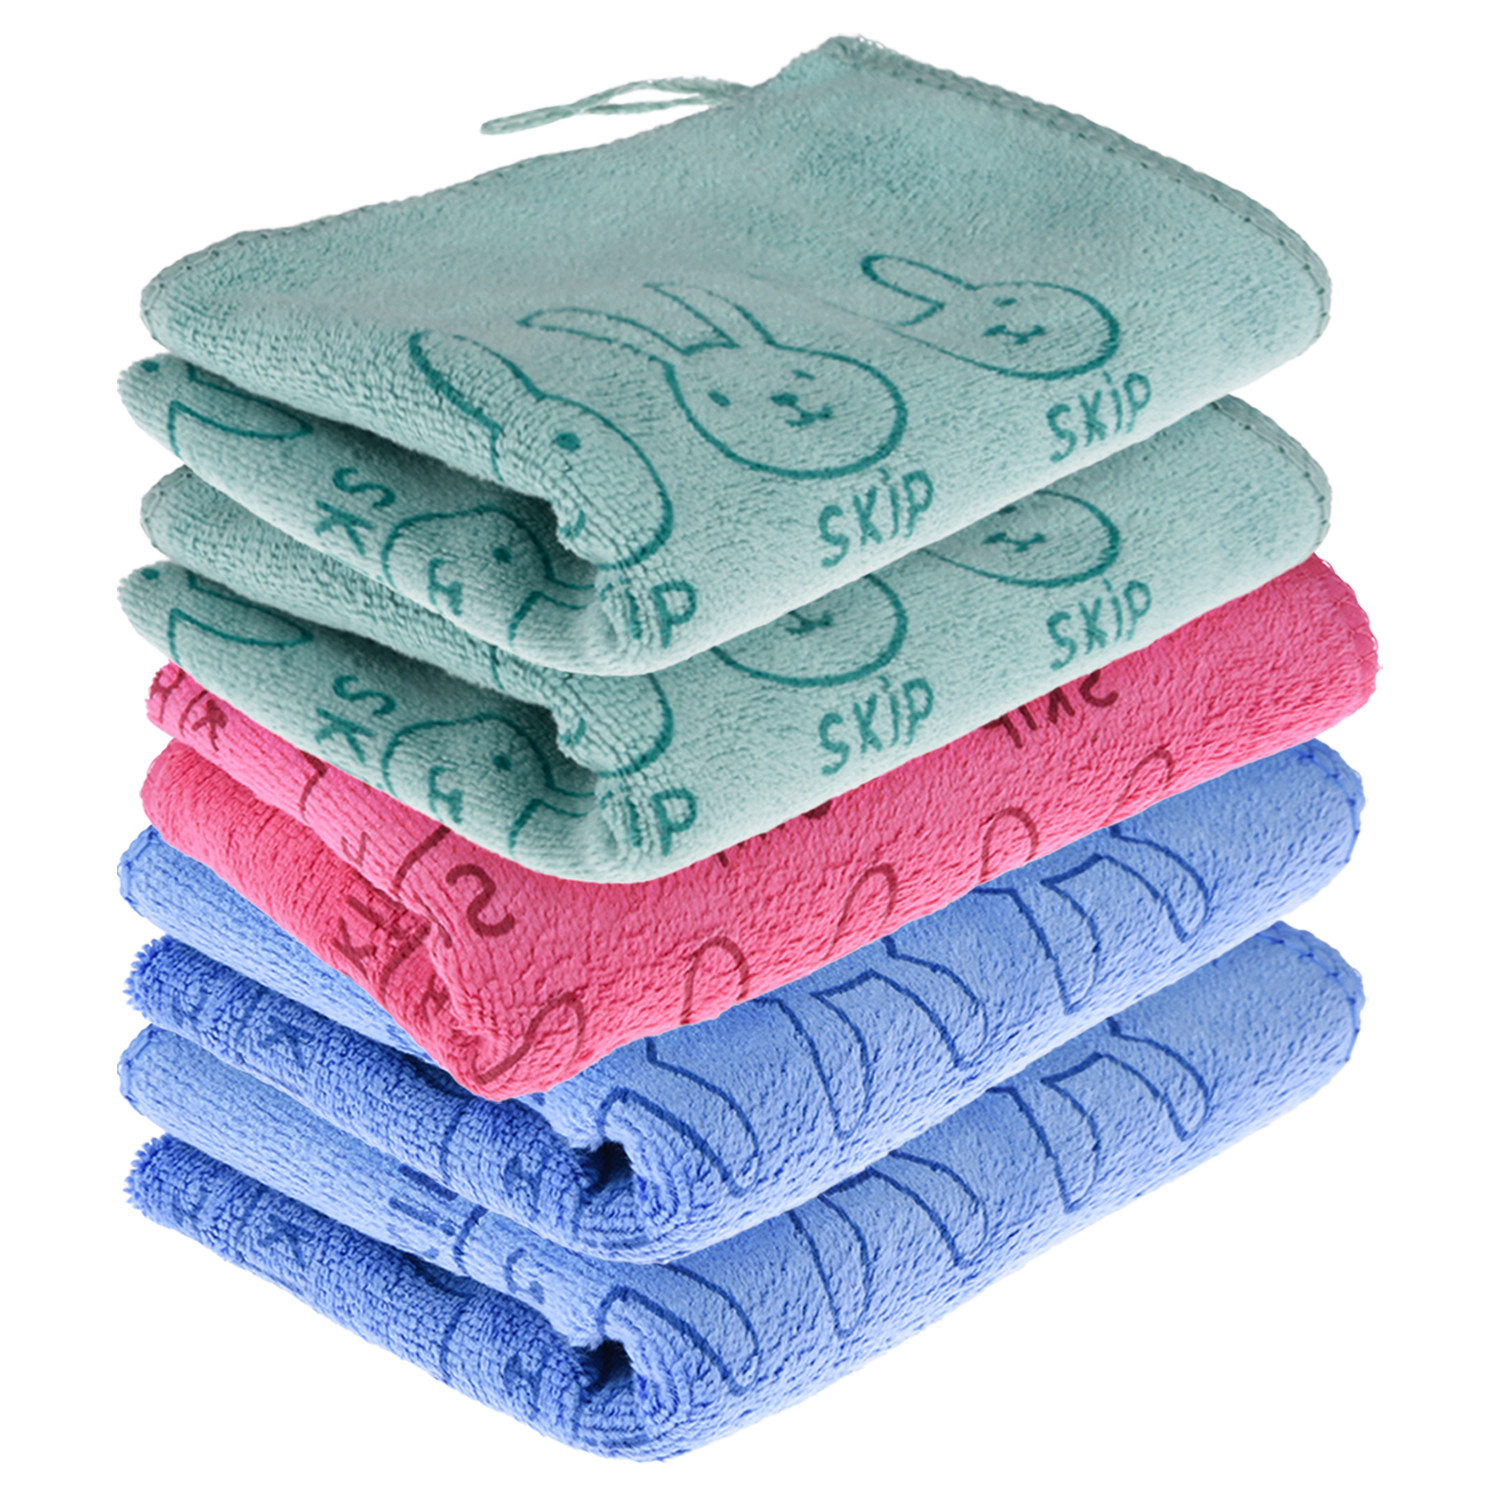 Kuber Industries Cleaning Towel | Reusable Cleaning Towel for Baby | Duster Towel for Home Cleaning | Skip Cleaning Cloth Towel with Hanging Loop | 30x40 | Pack of 5 | Multi